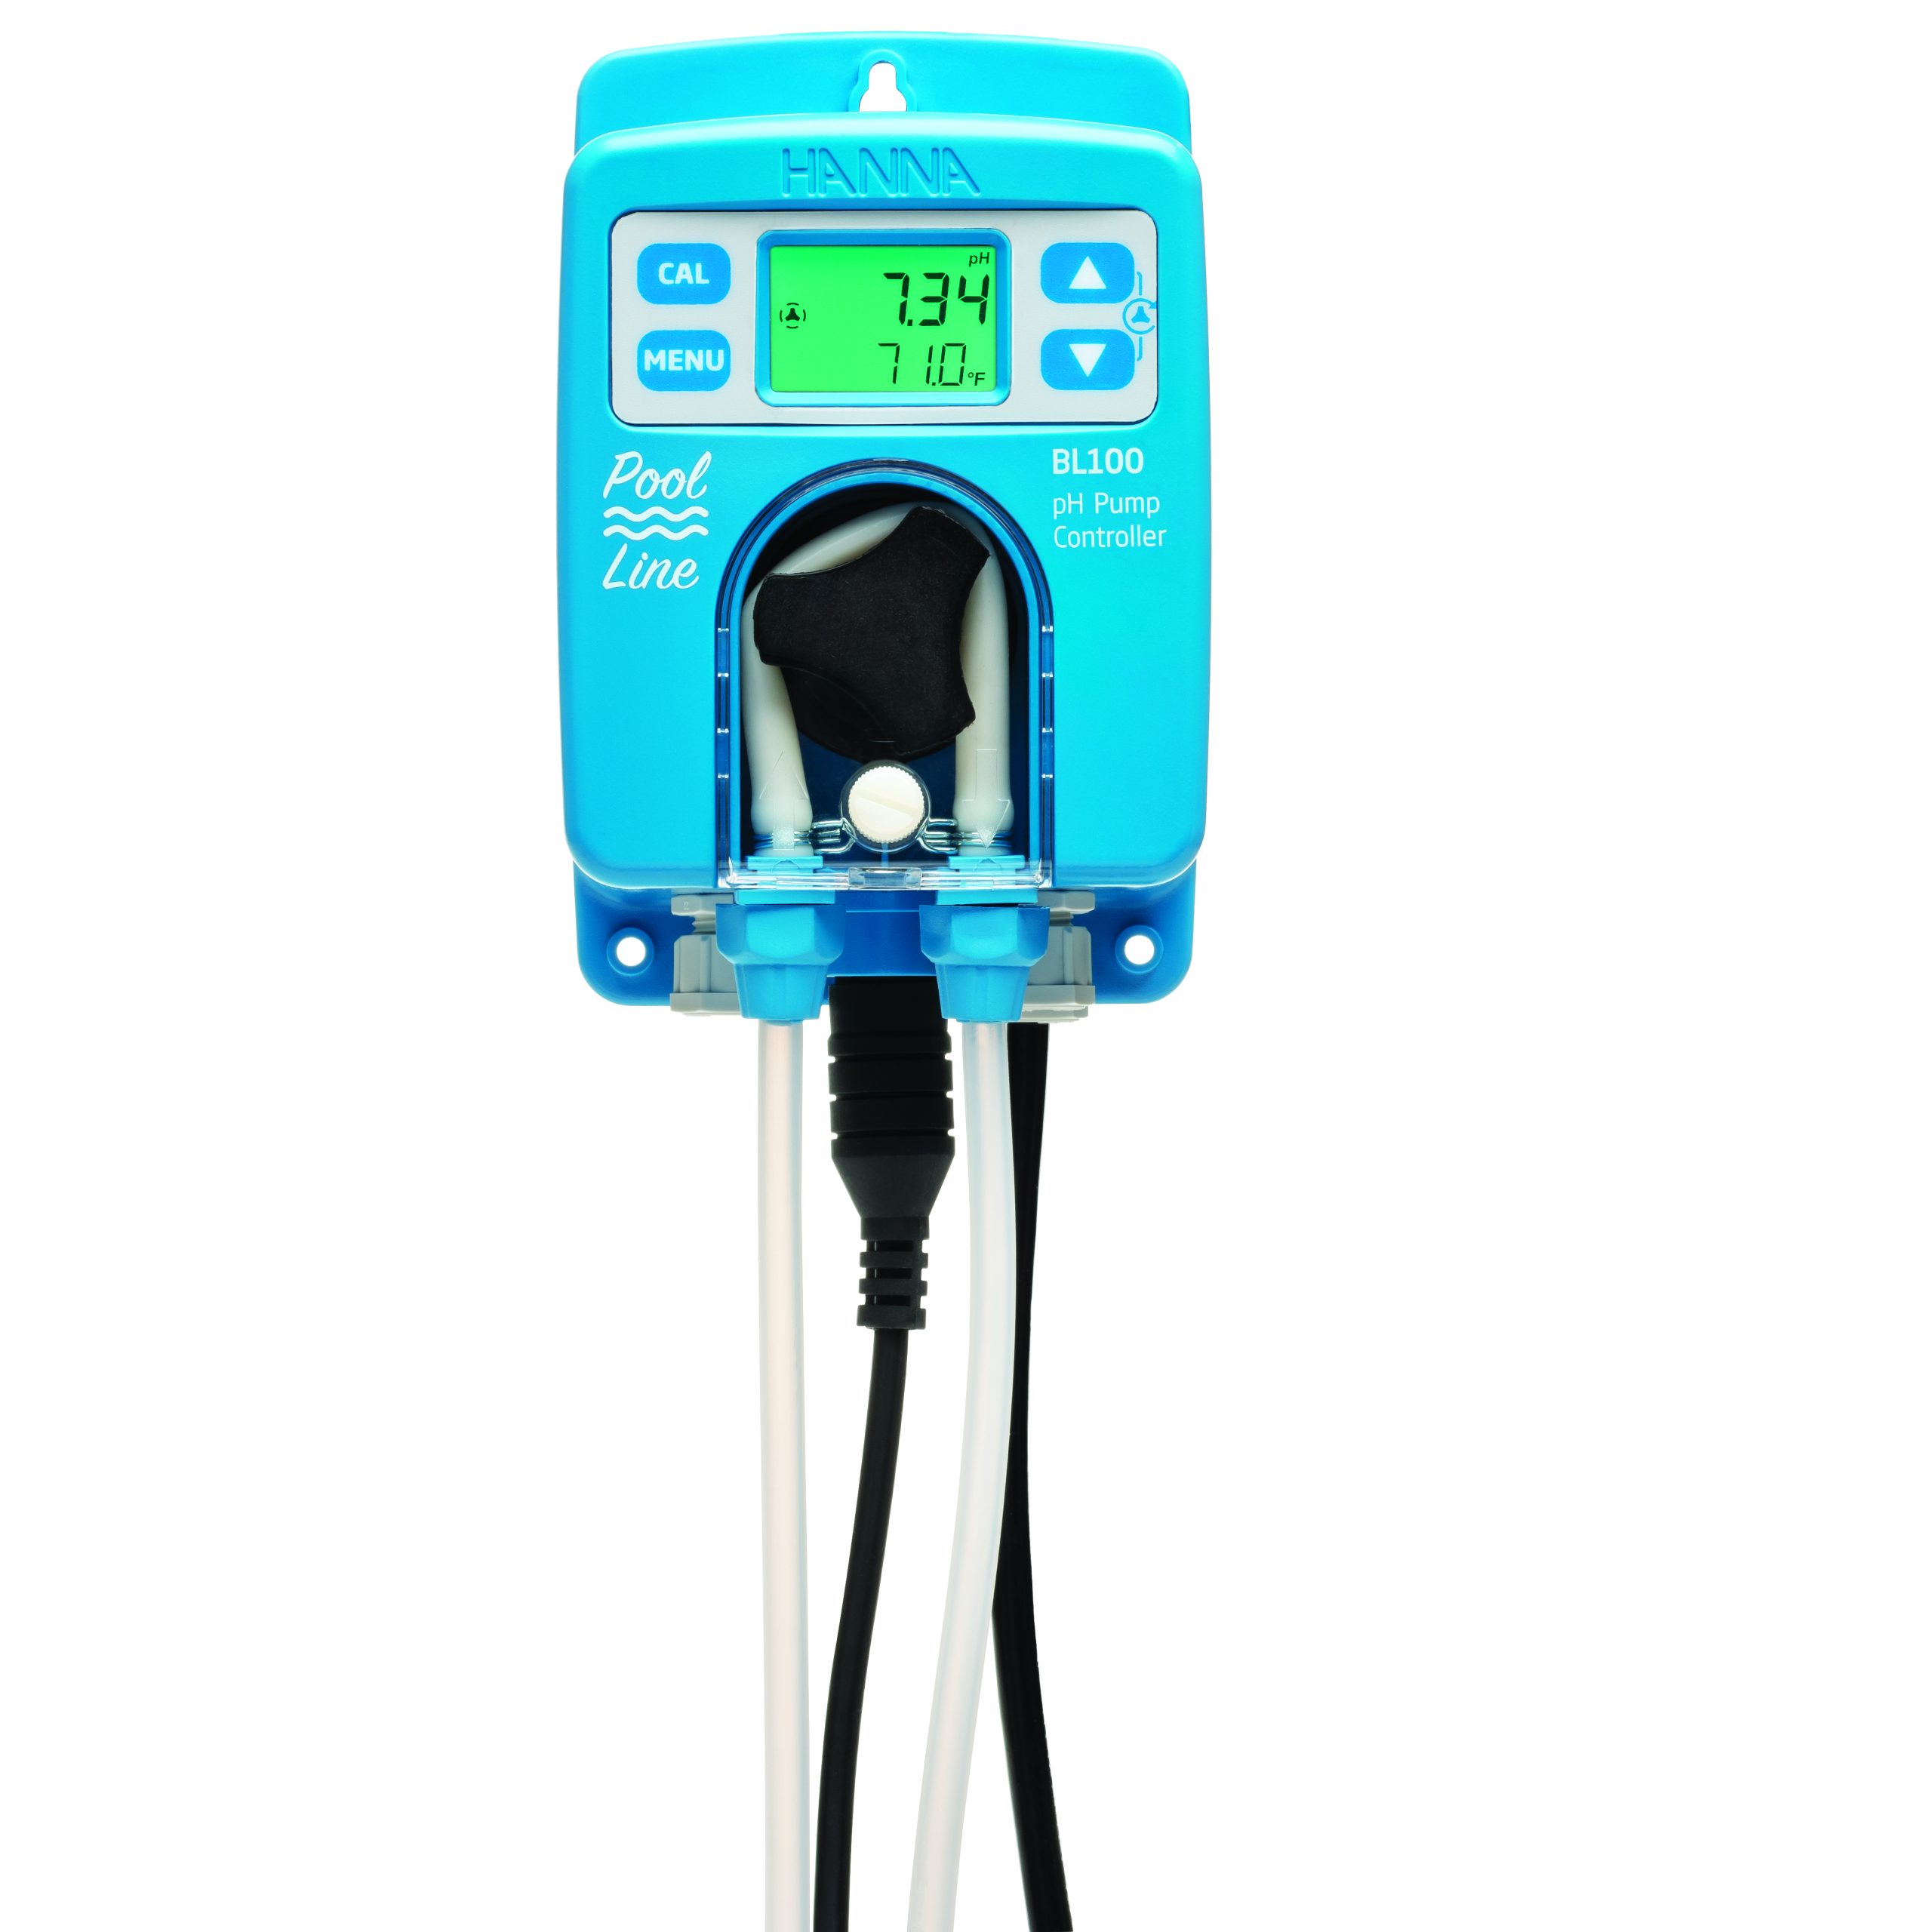 Pool Line pH controller and dosing pump with HI10053 pH probe, injection valve fitting and tubing (BL100-10)